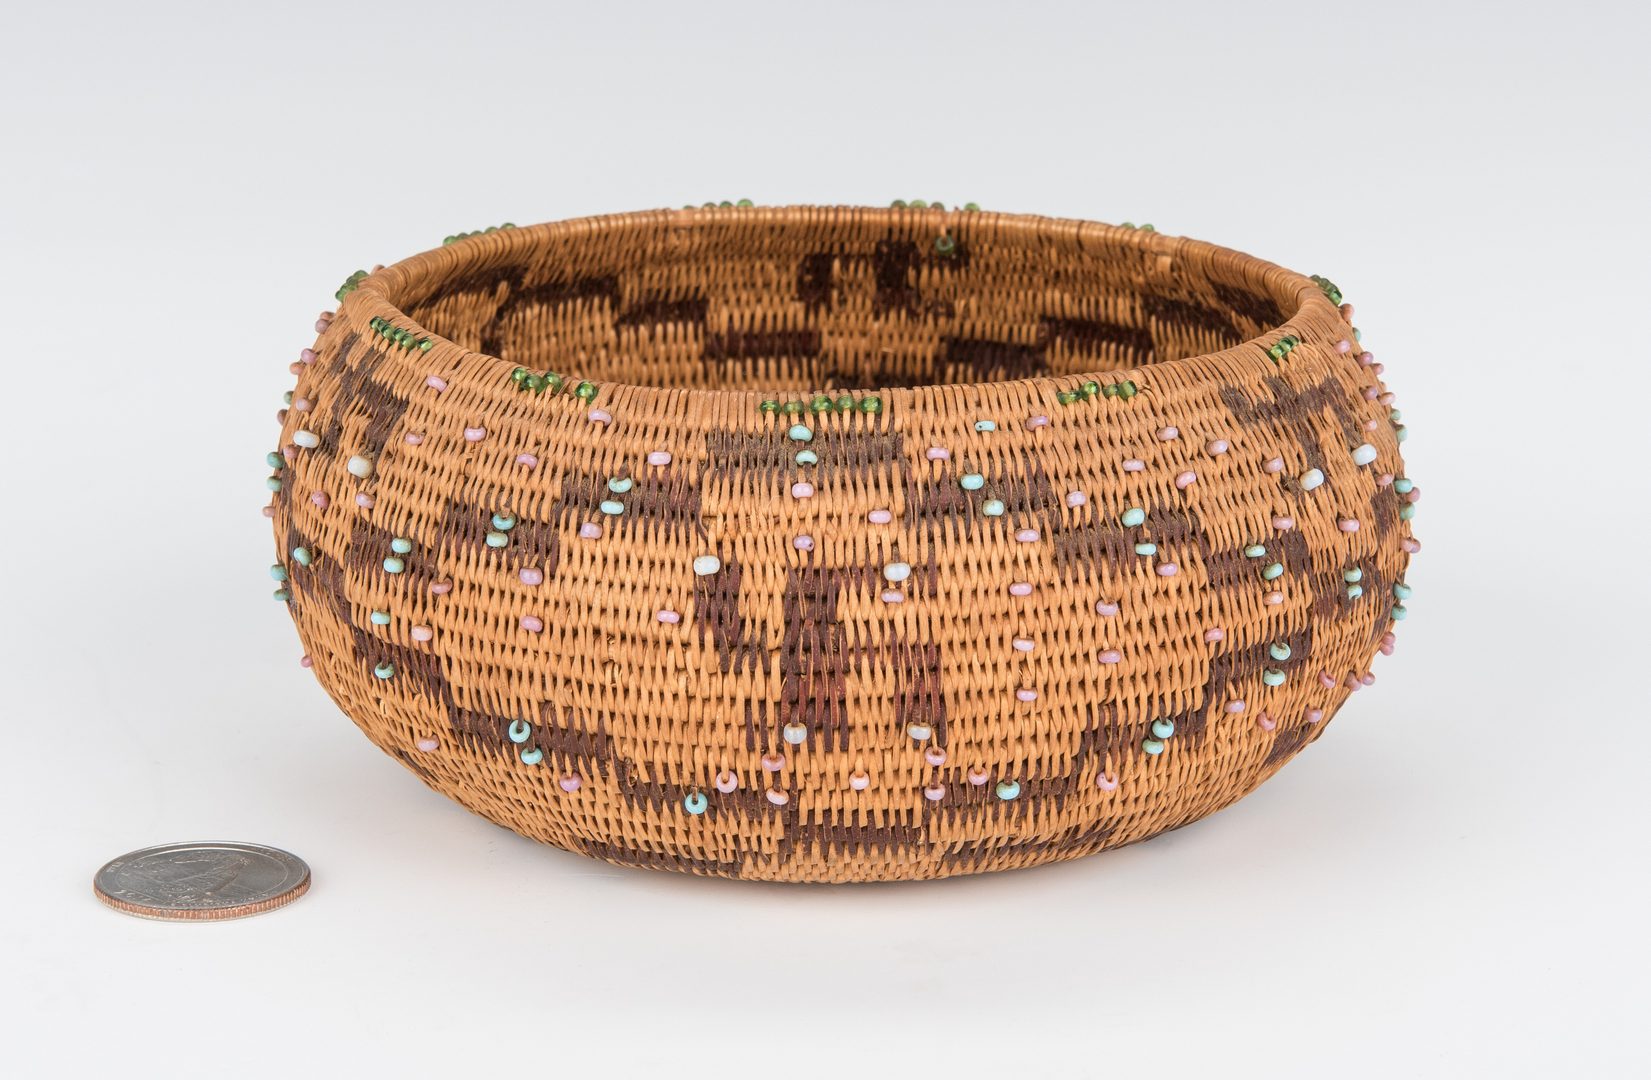 Lot 686: 2 Native American Pomo Baskets, 1 Feather